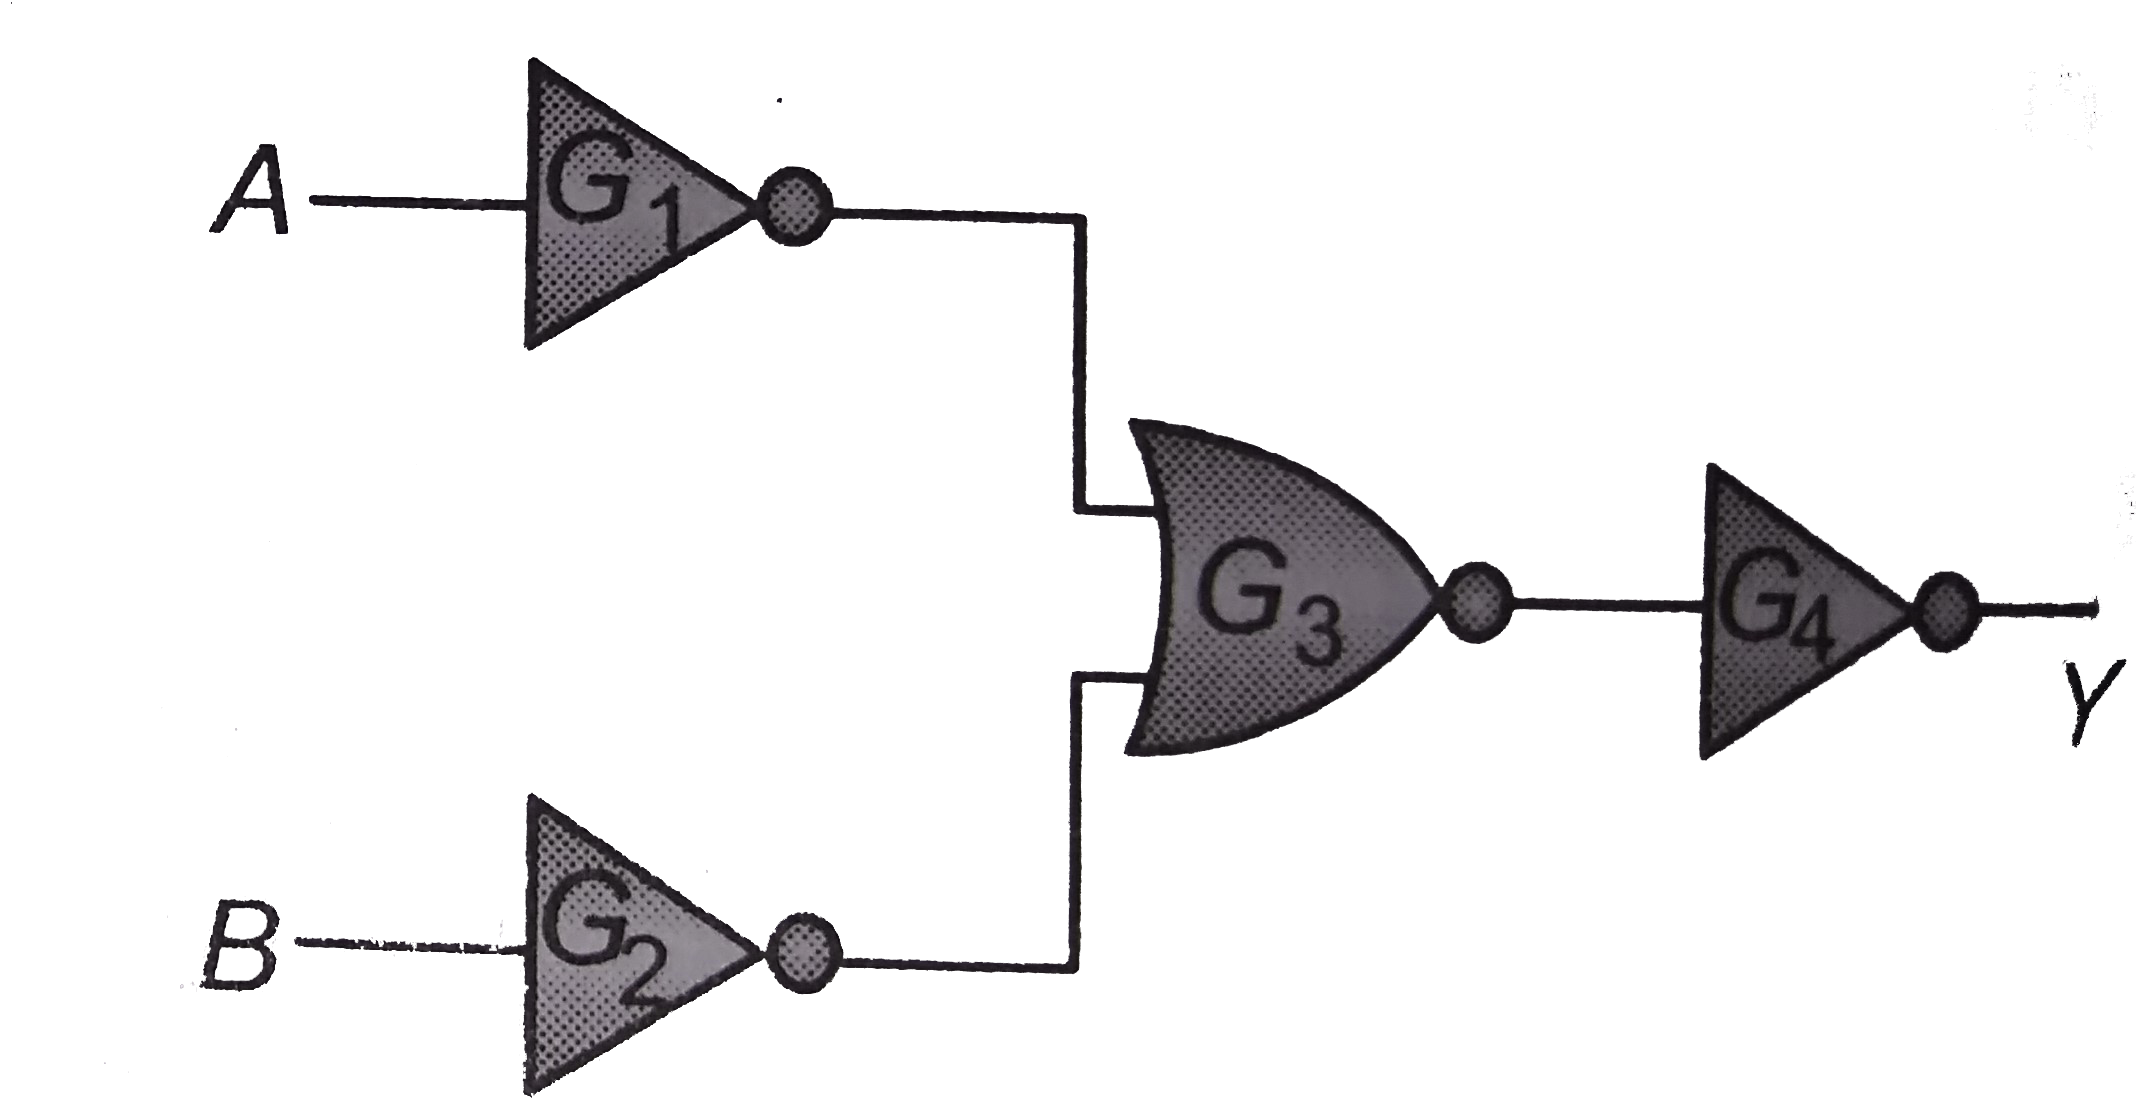 The combination of gates shown below produces